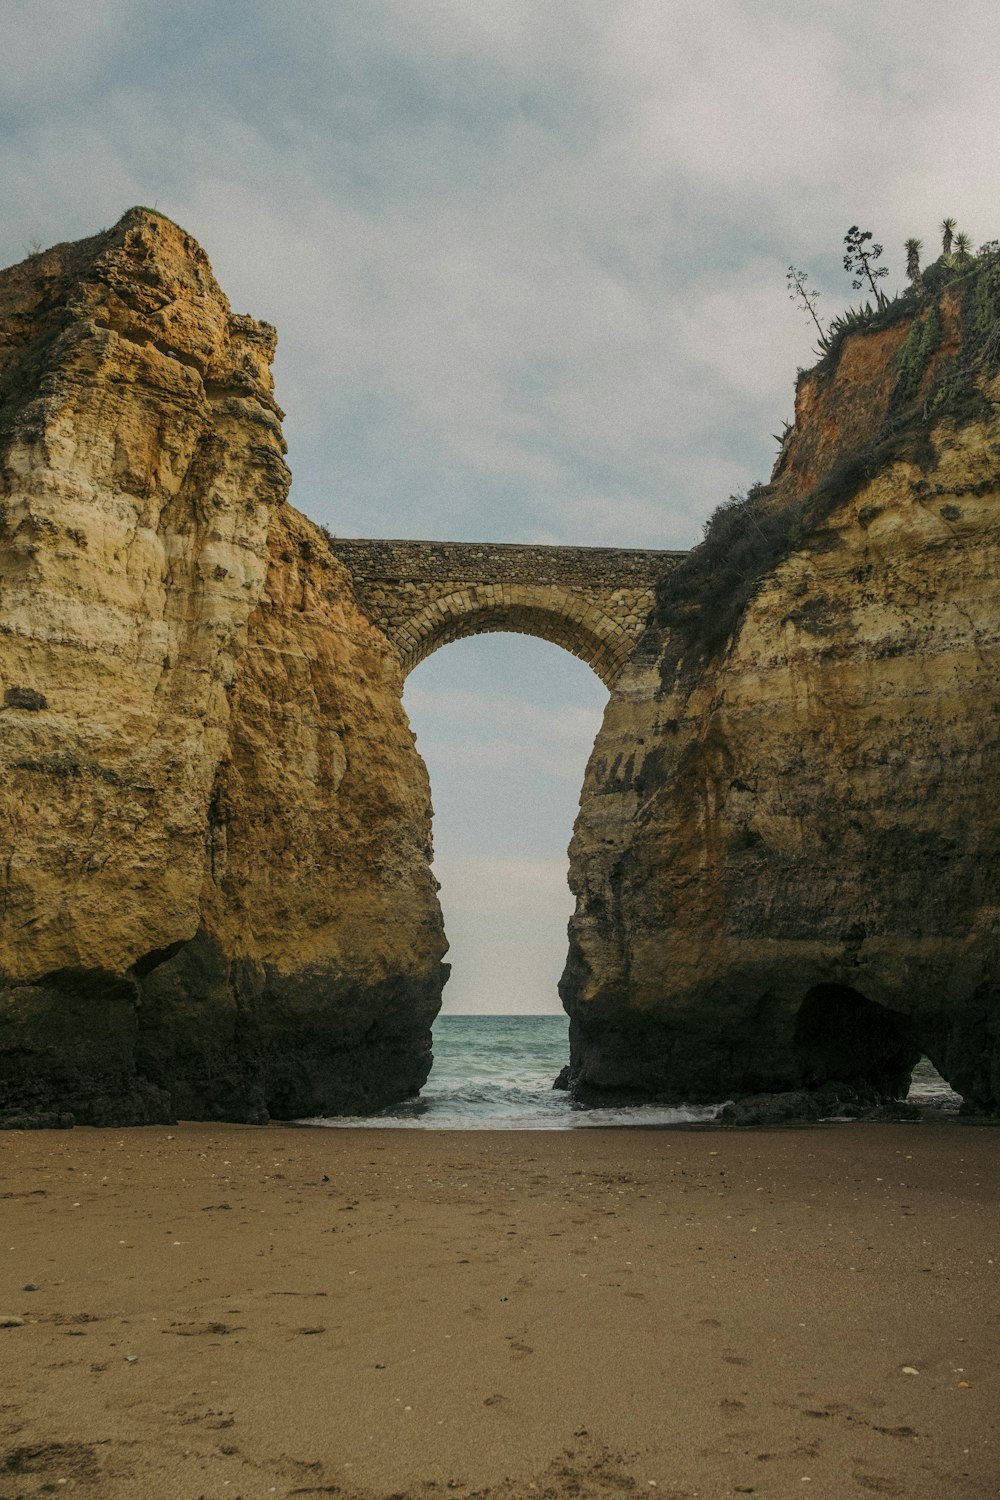 a large rock arch over a beach